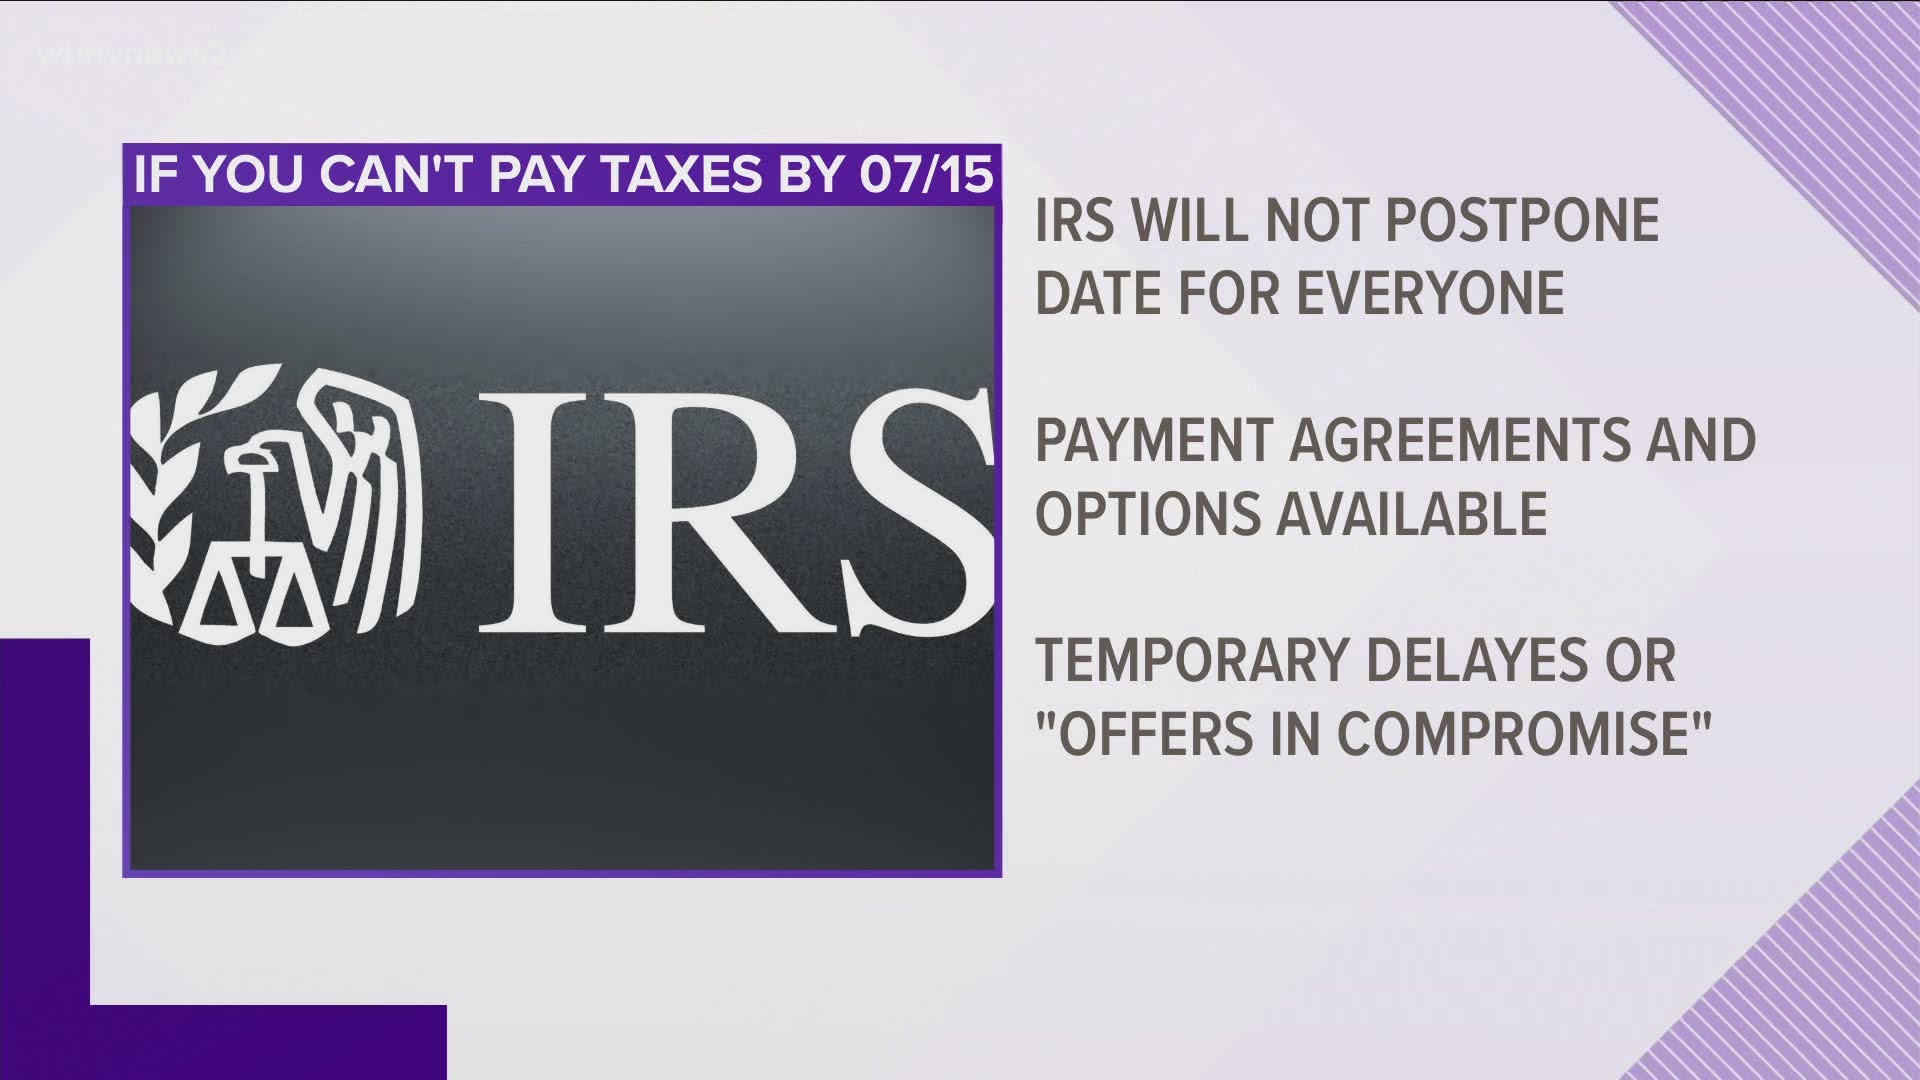 The deadline to pay taxes is July 15 and it likely won't change. There are still some options if you need help.